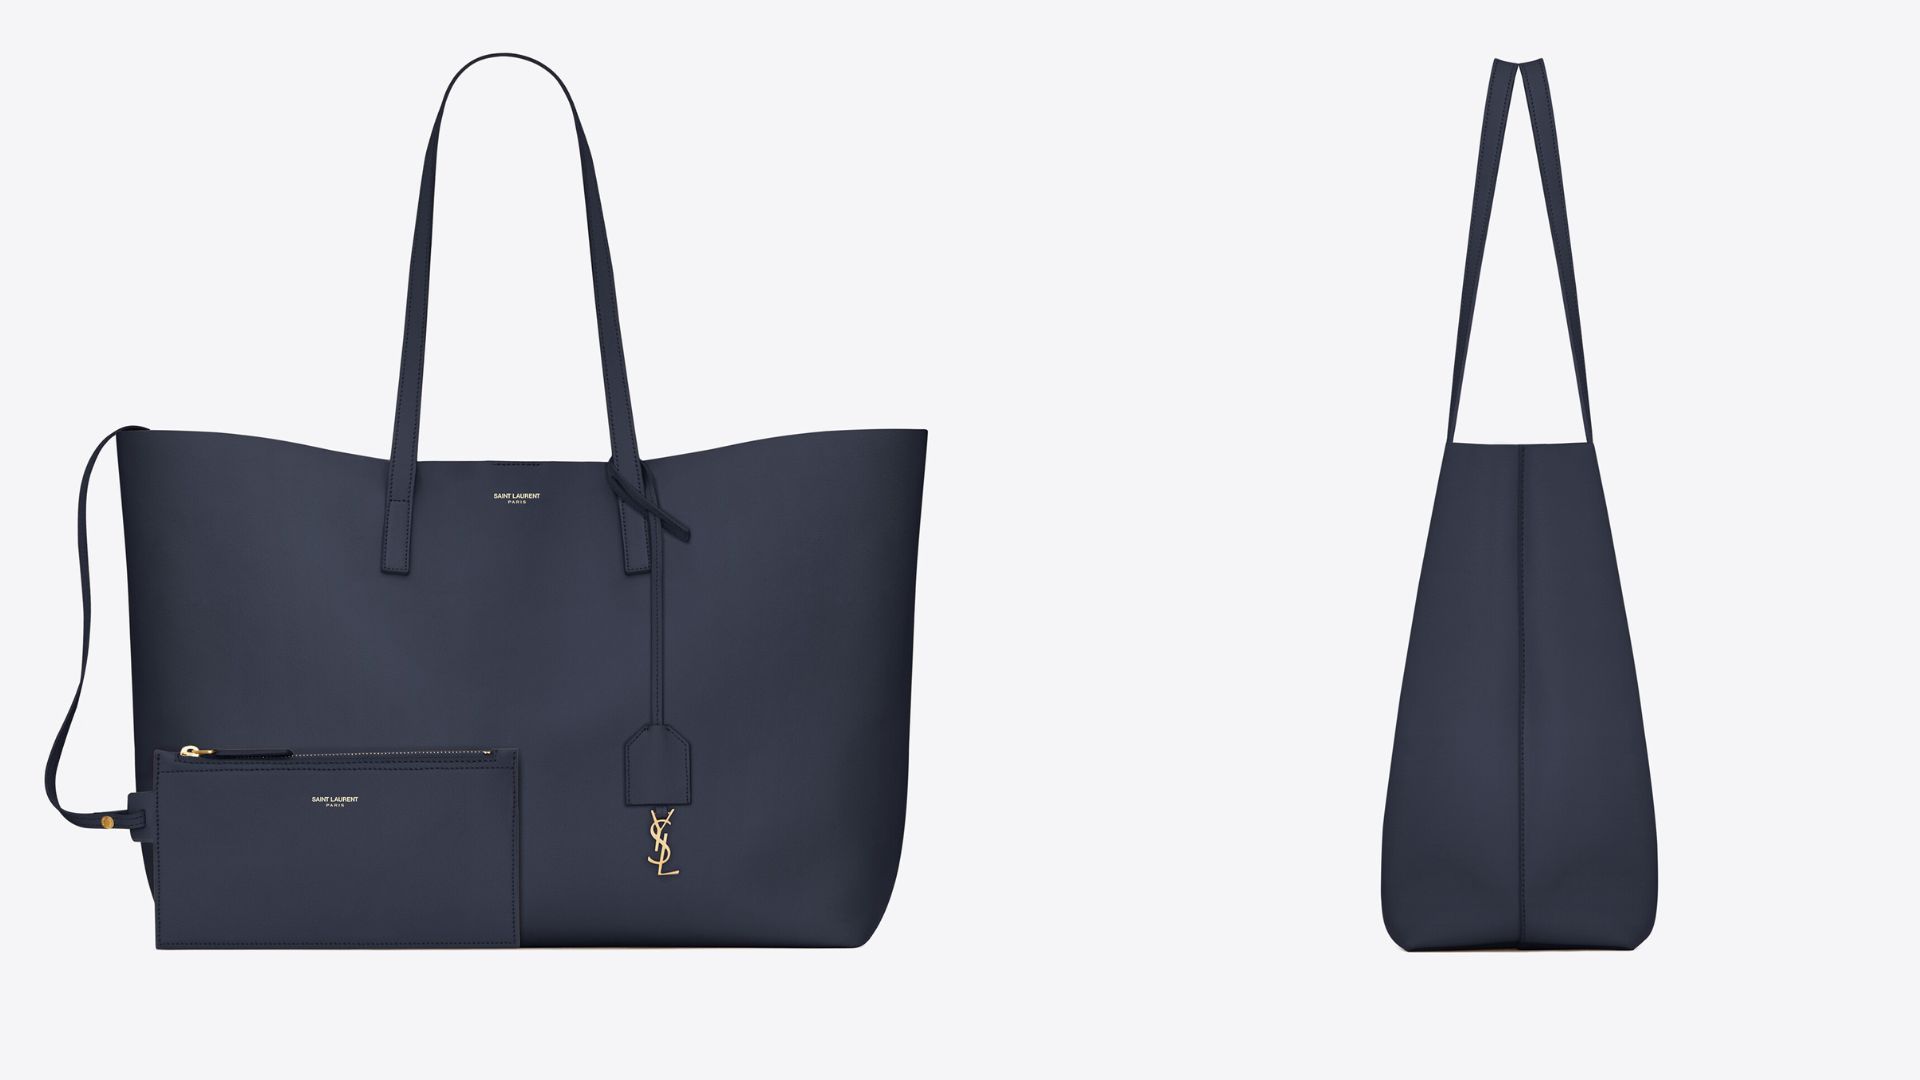 Yves Saint Laurent Bags, The best prices online in Malaysia